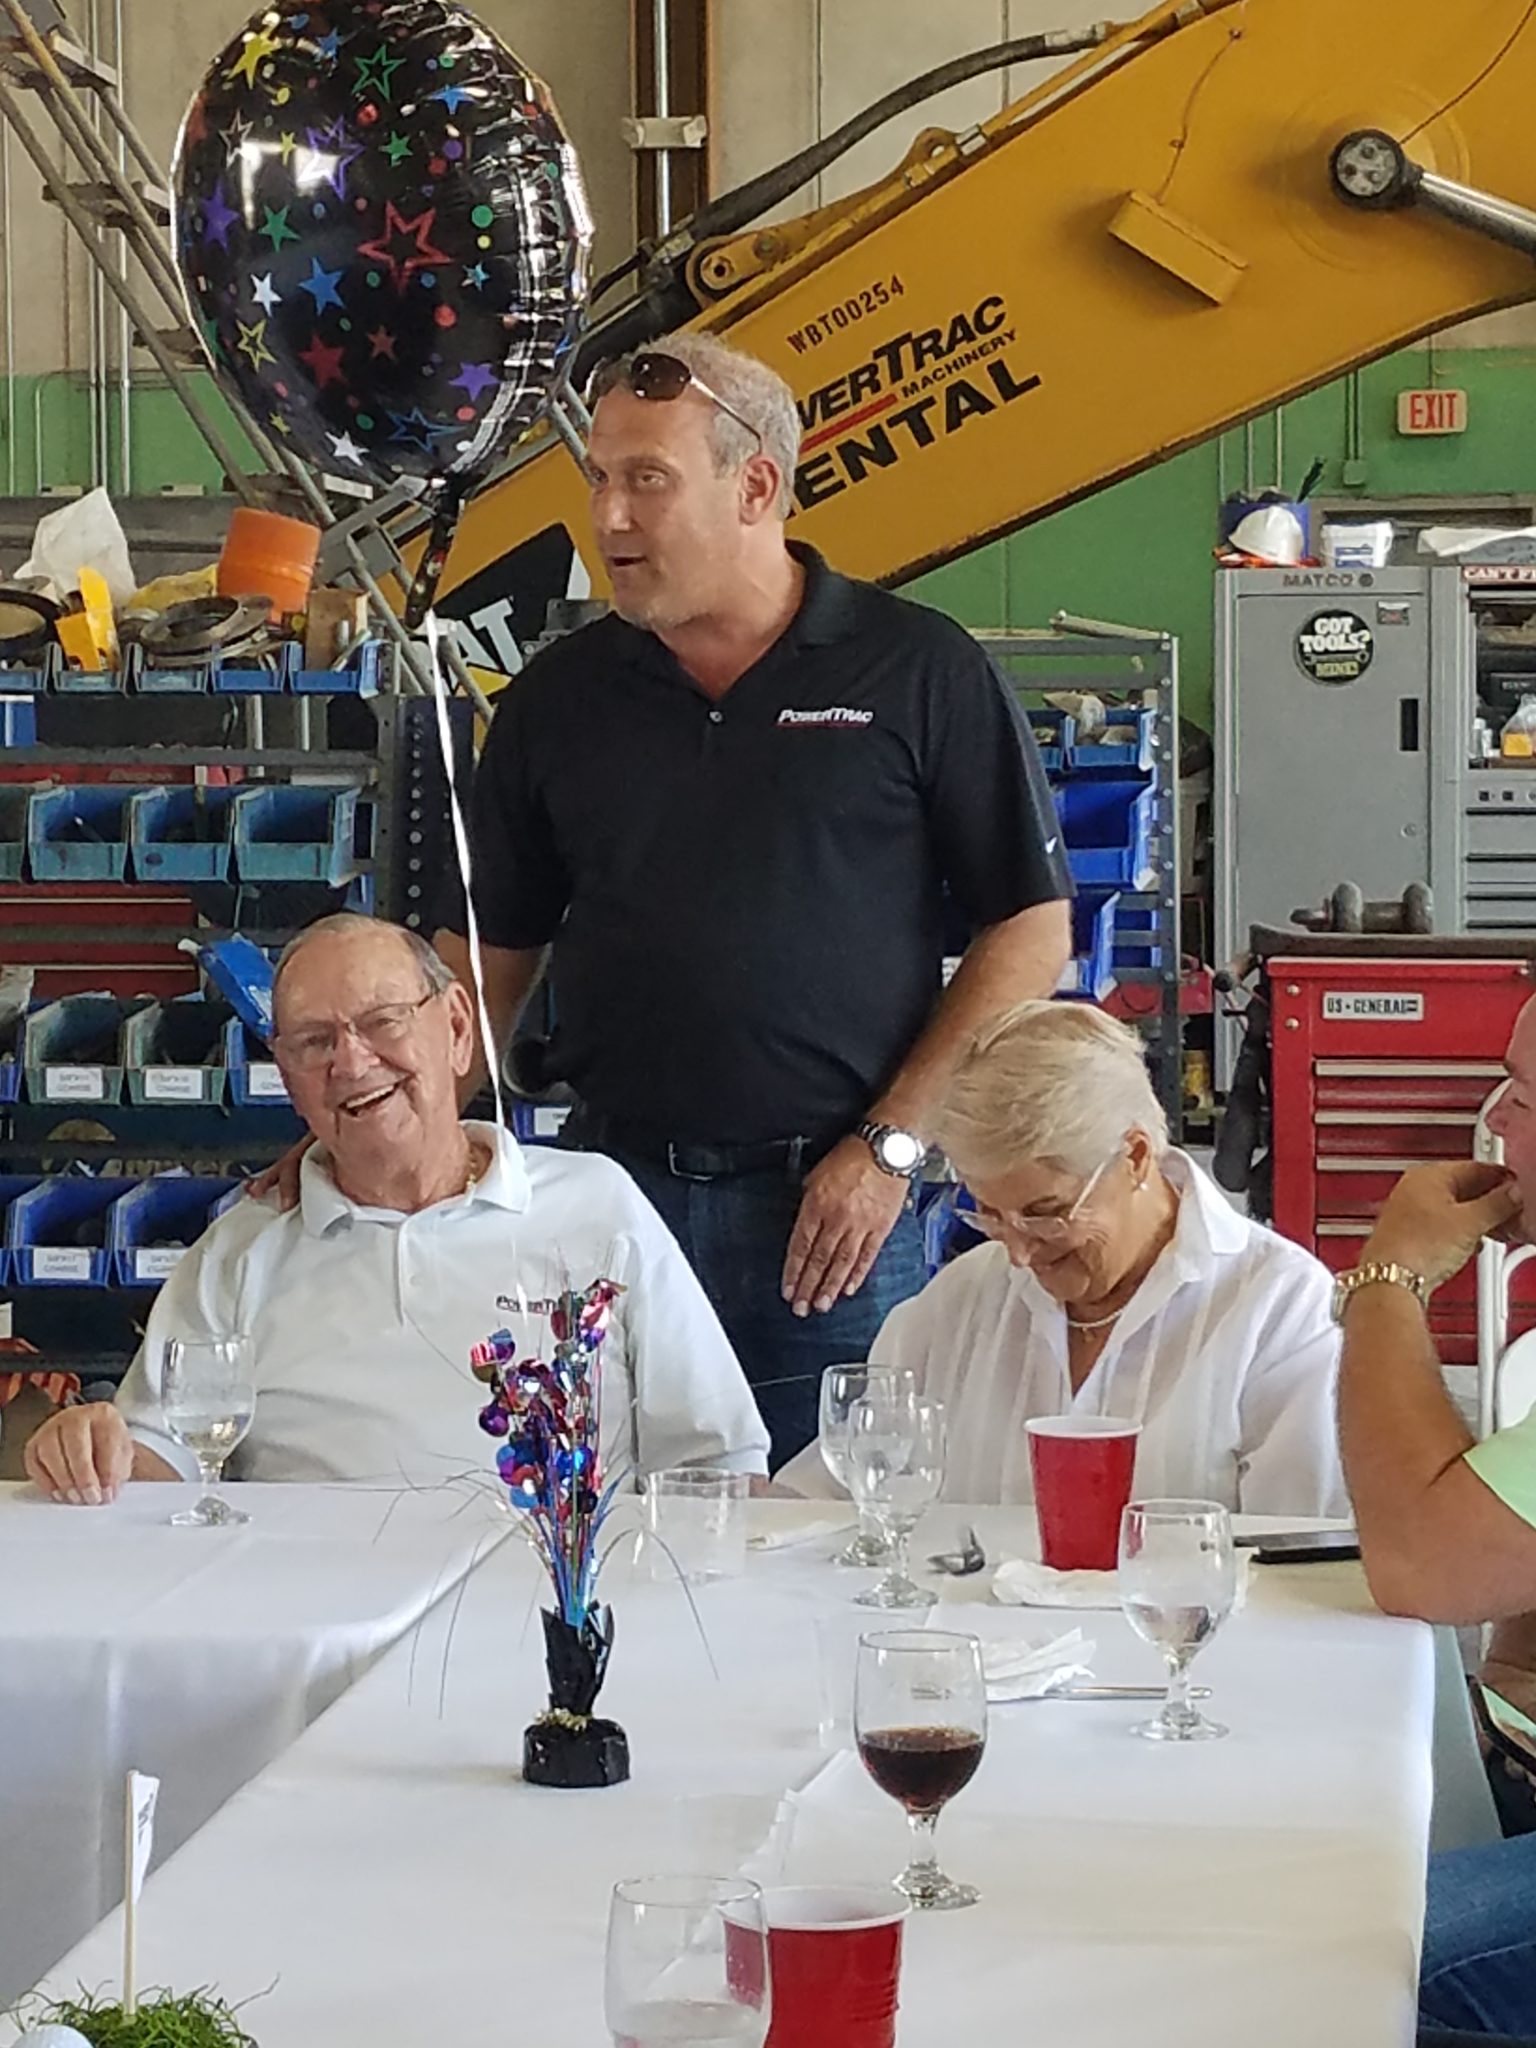 Jerry's Retirement Party at PowerTrac